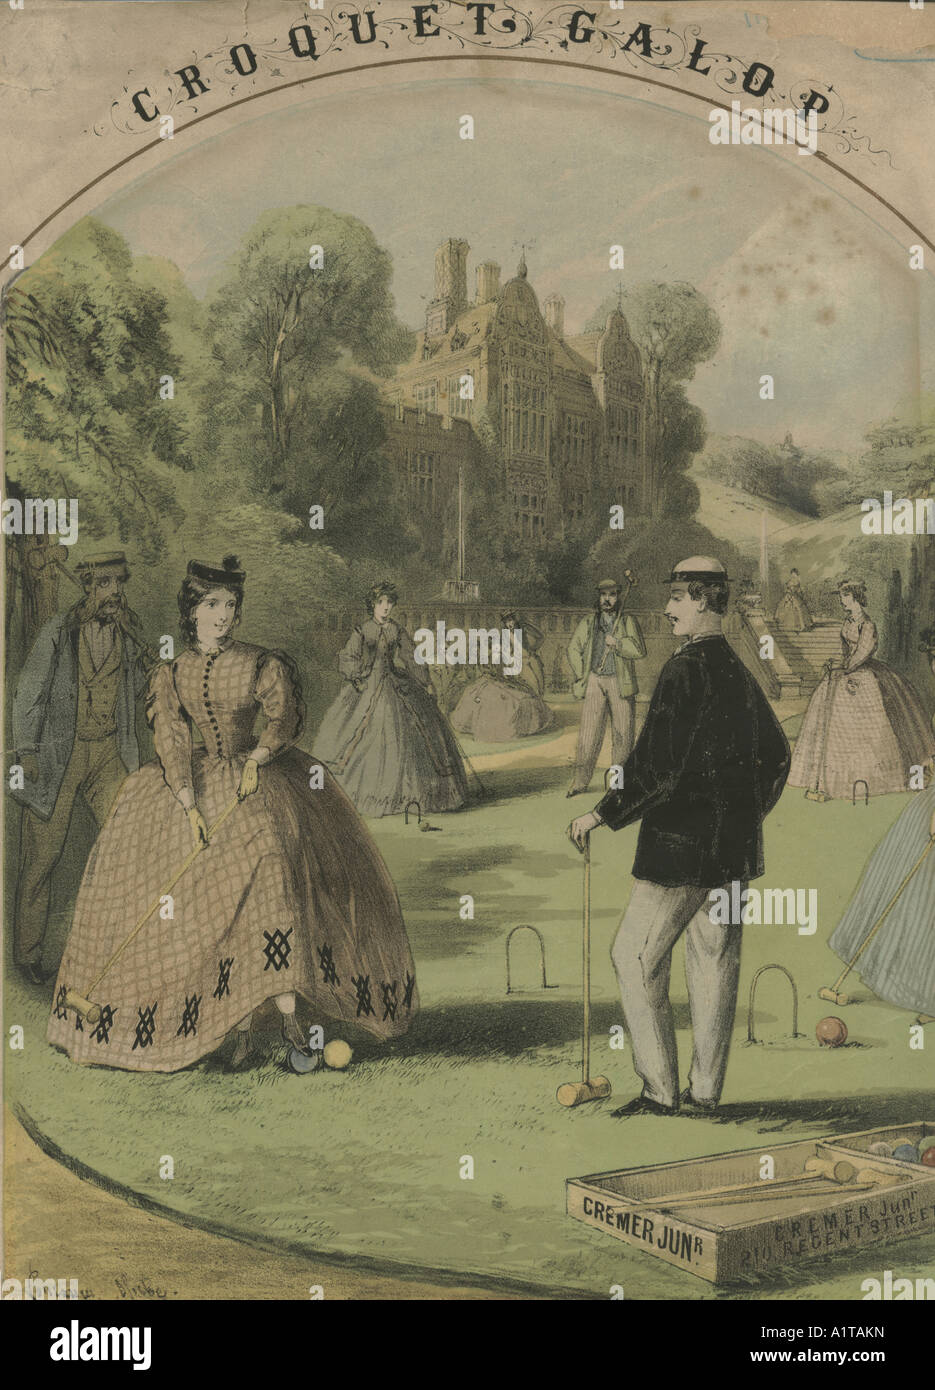 Chromolithographed sheet music cover The Croquet Galop by artist Alfred Concanen circa 1860 showing a match in progress advertising Cremer equipment Stock Photo